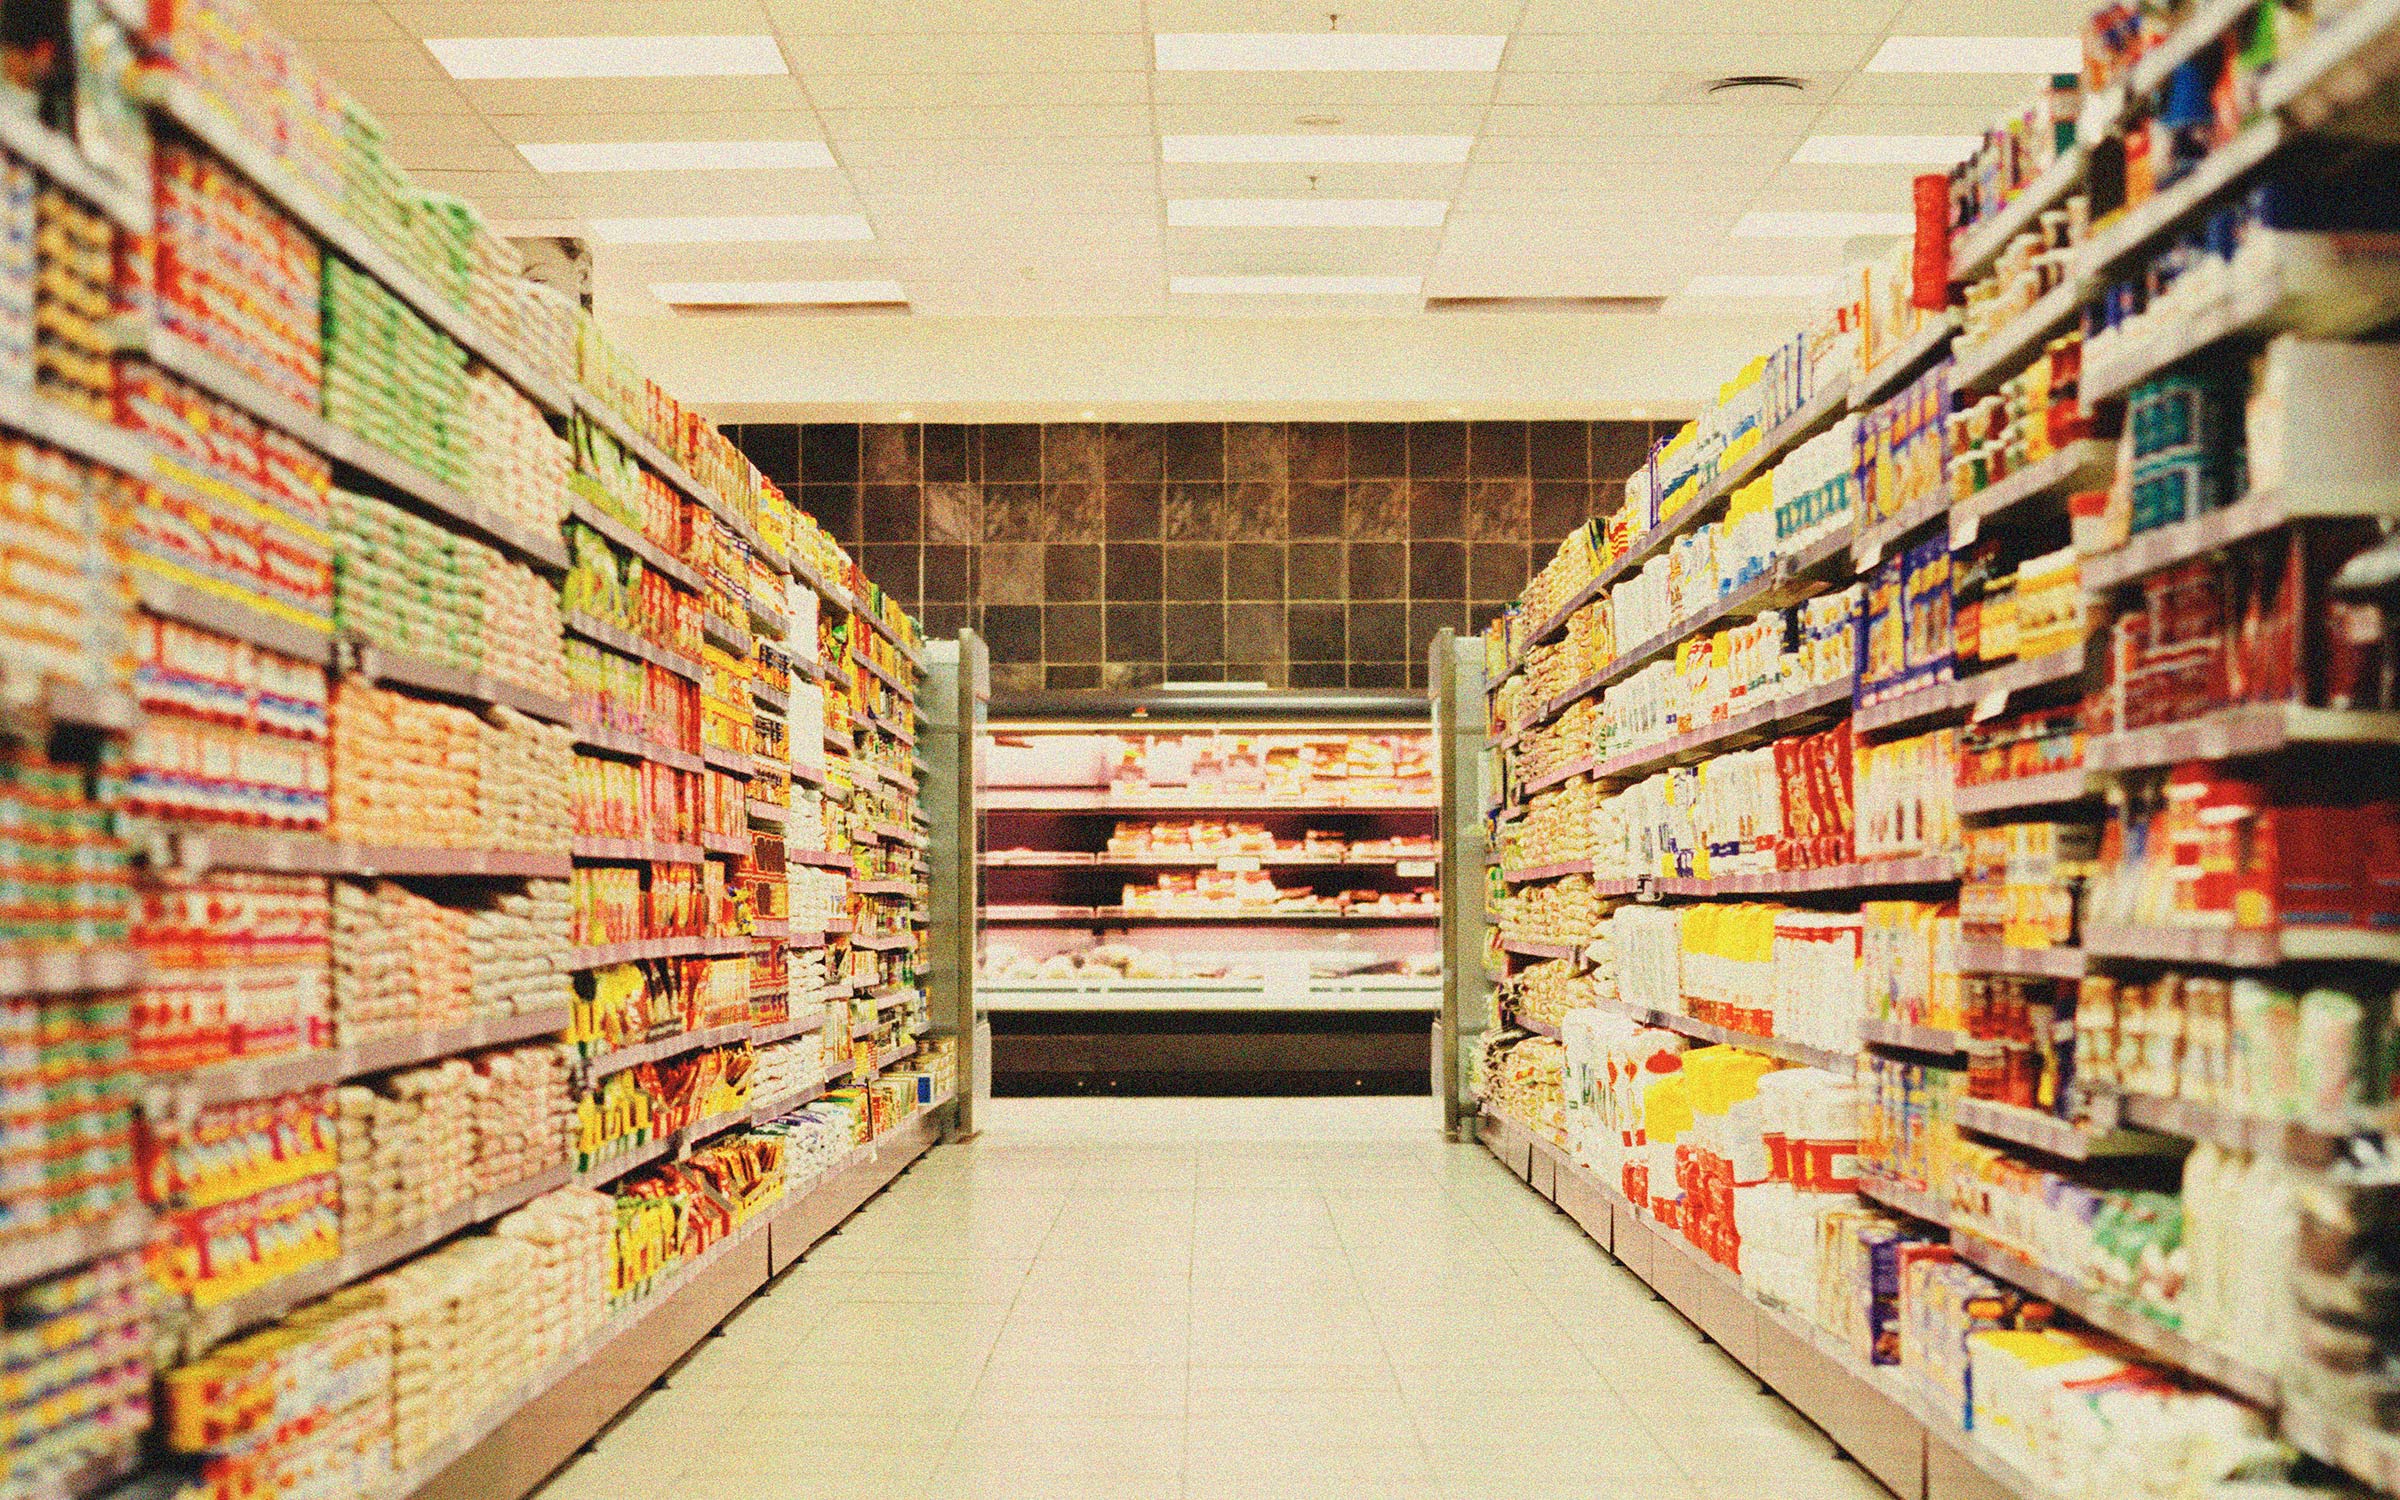 The Supermarket of the Visible Toward a General Economy of Images